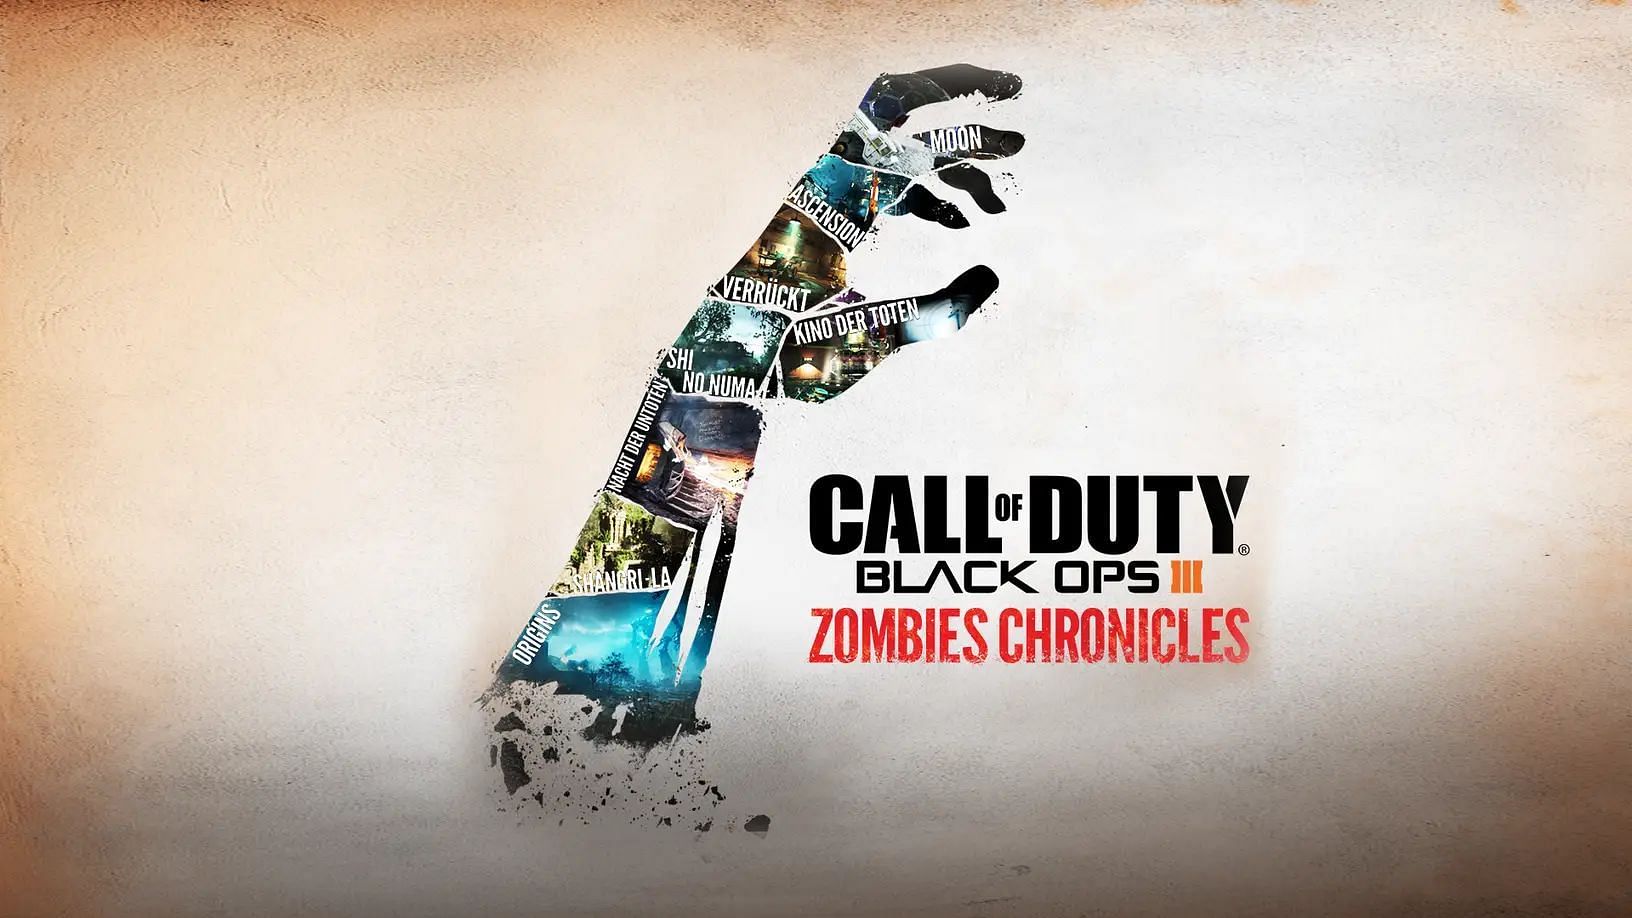 Why call of duty should resurrect Zombie Chronicles for the ultimate zombie survival experience 